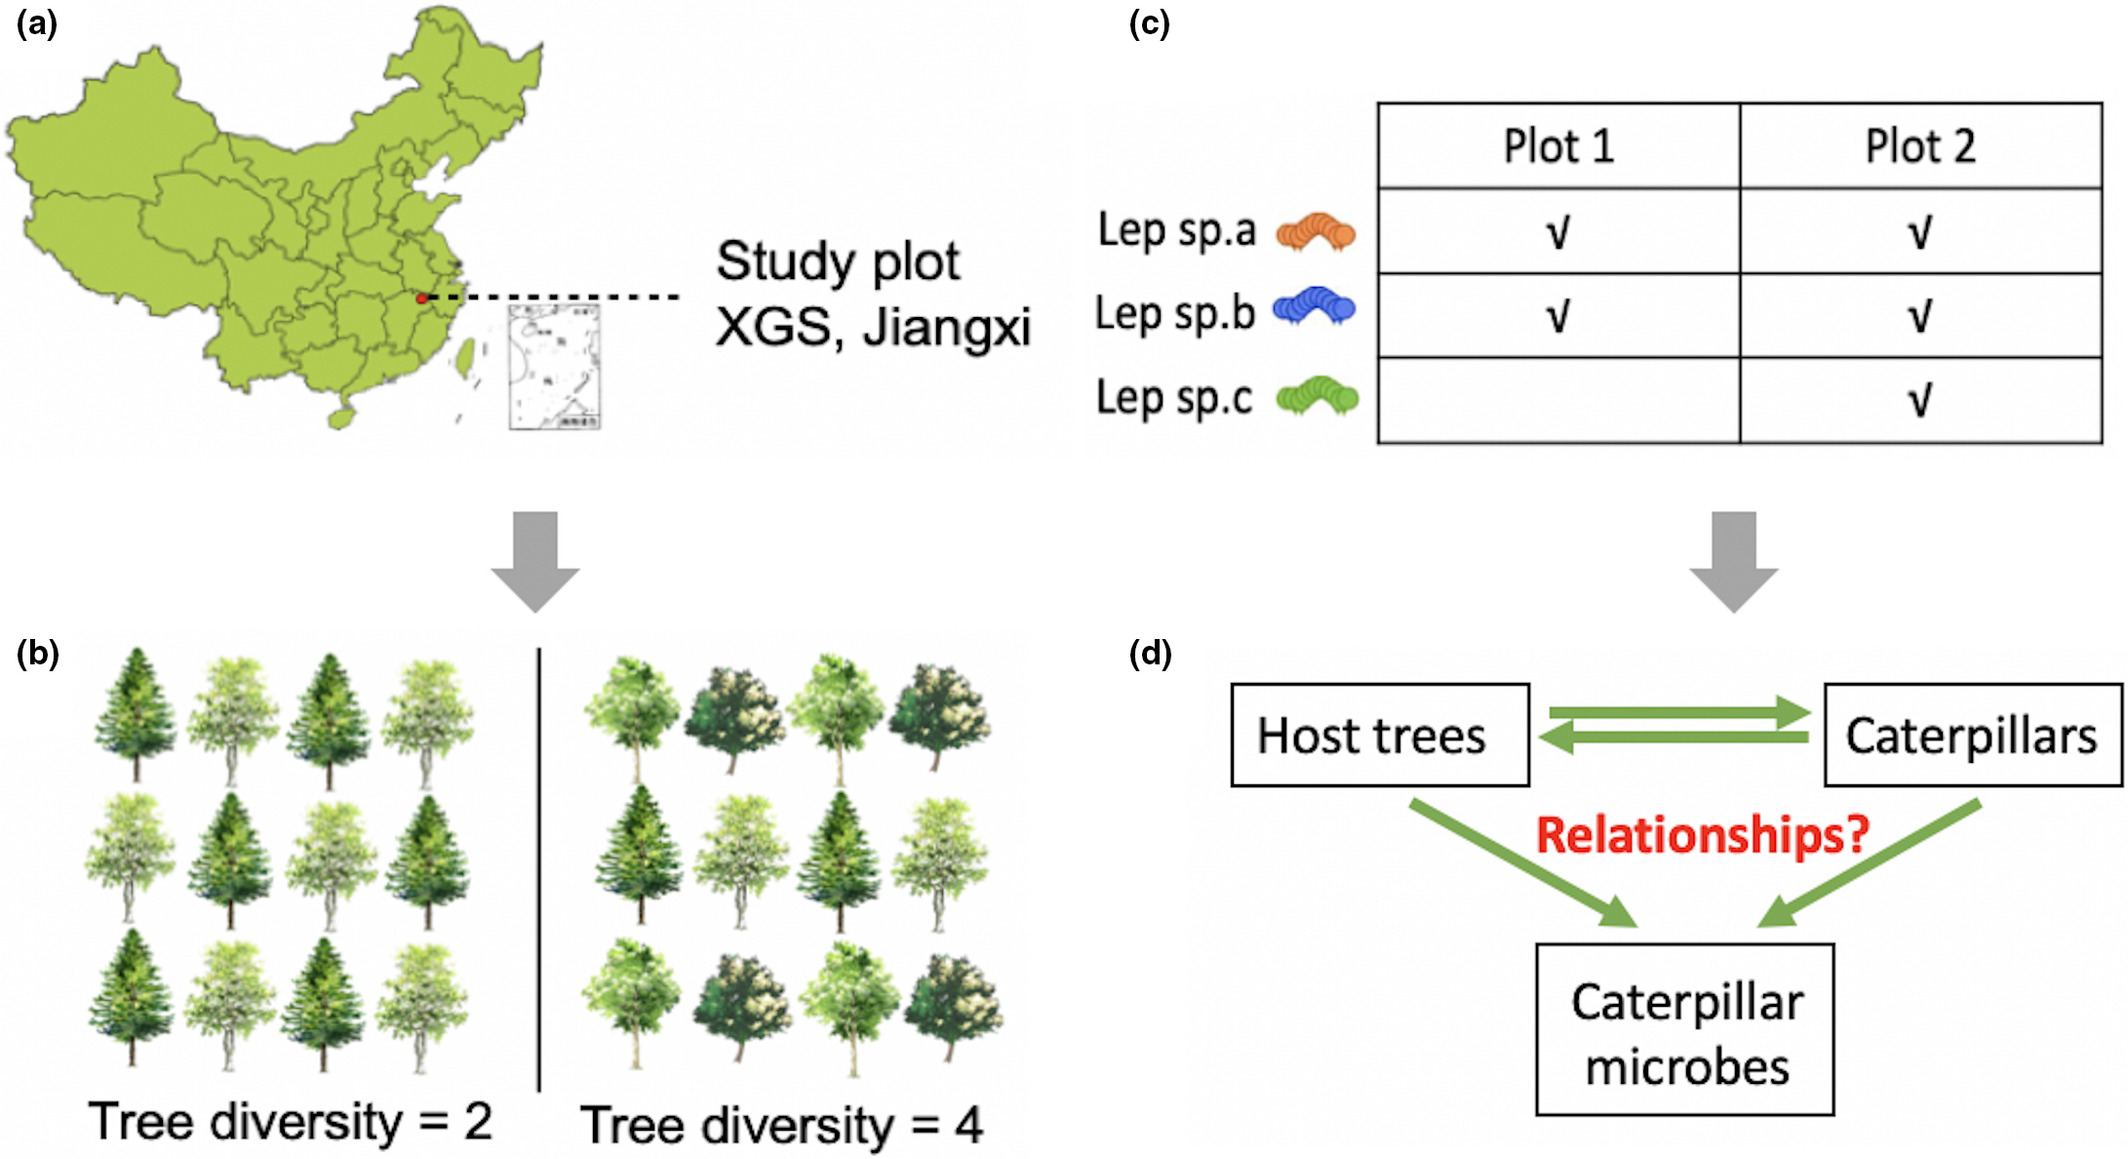 Tree diversity and functional leaf traits drive herbivore-associated microbiomes in subtropical China.